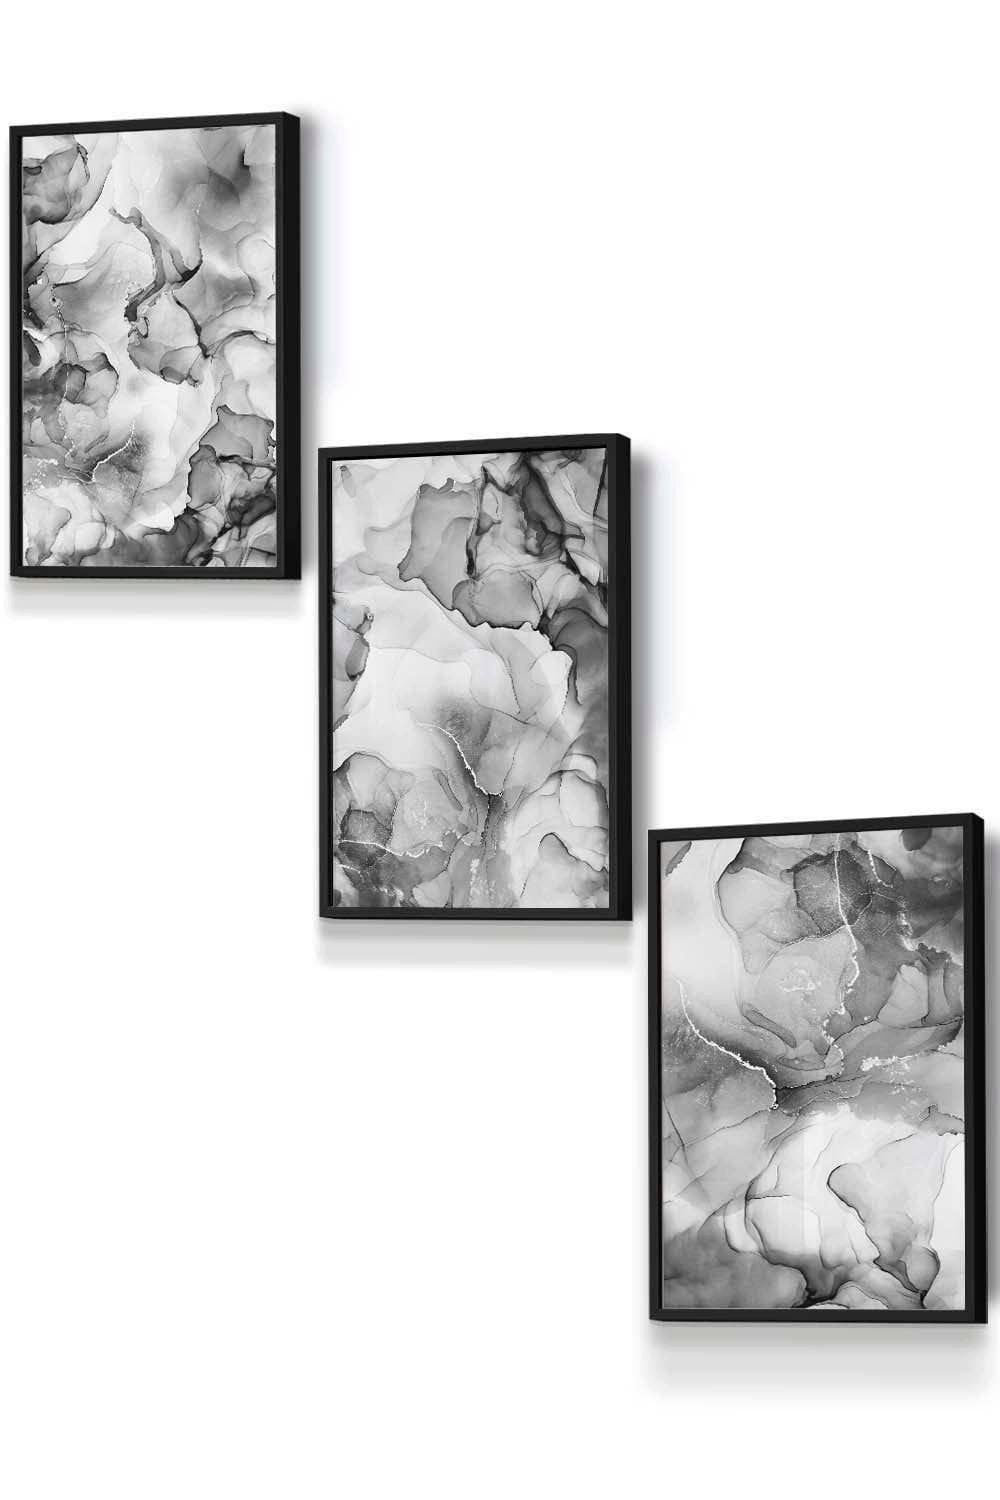 Set of 3 Black Framed Abstract Floral Fluid in Grey Wall Art